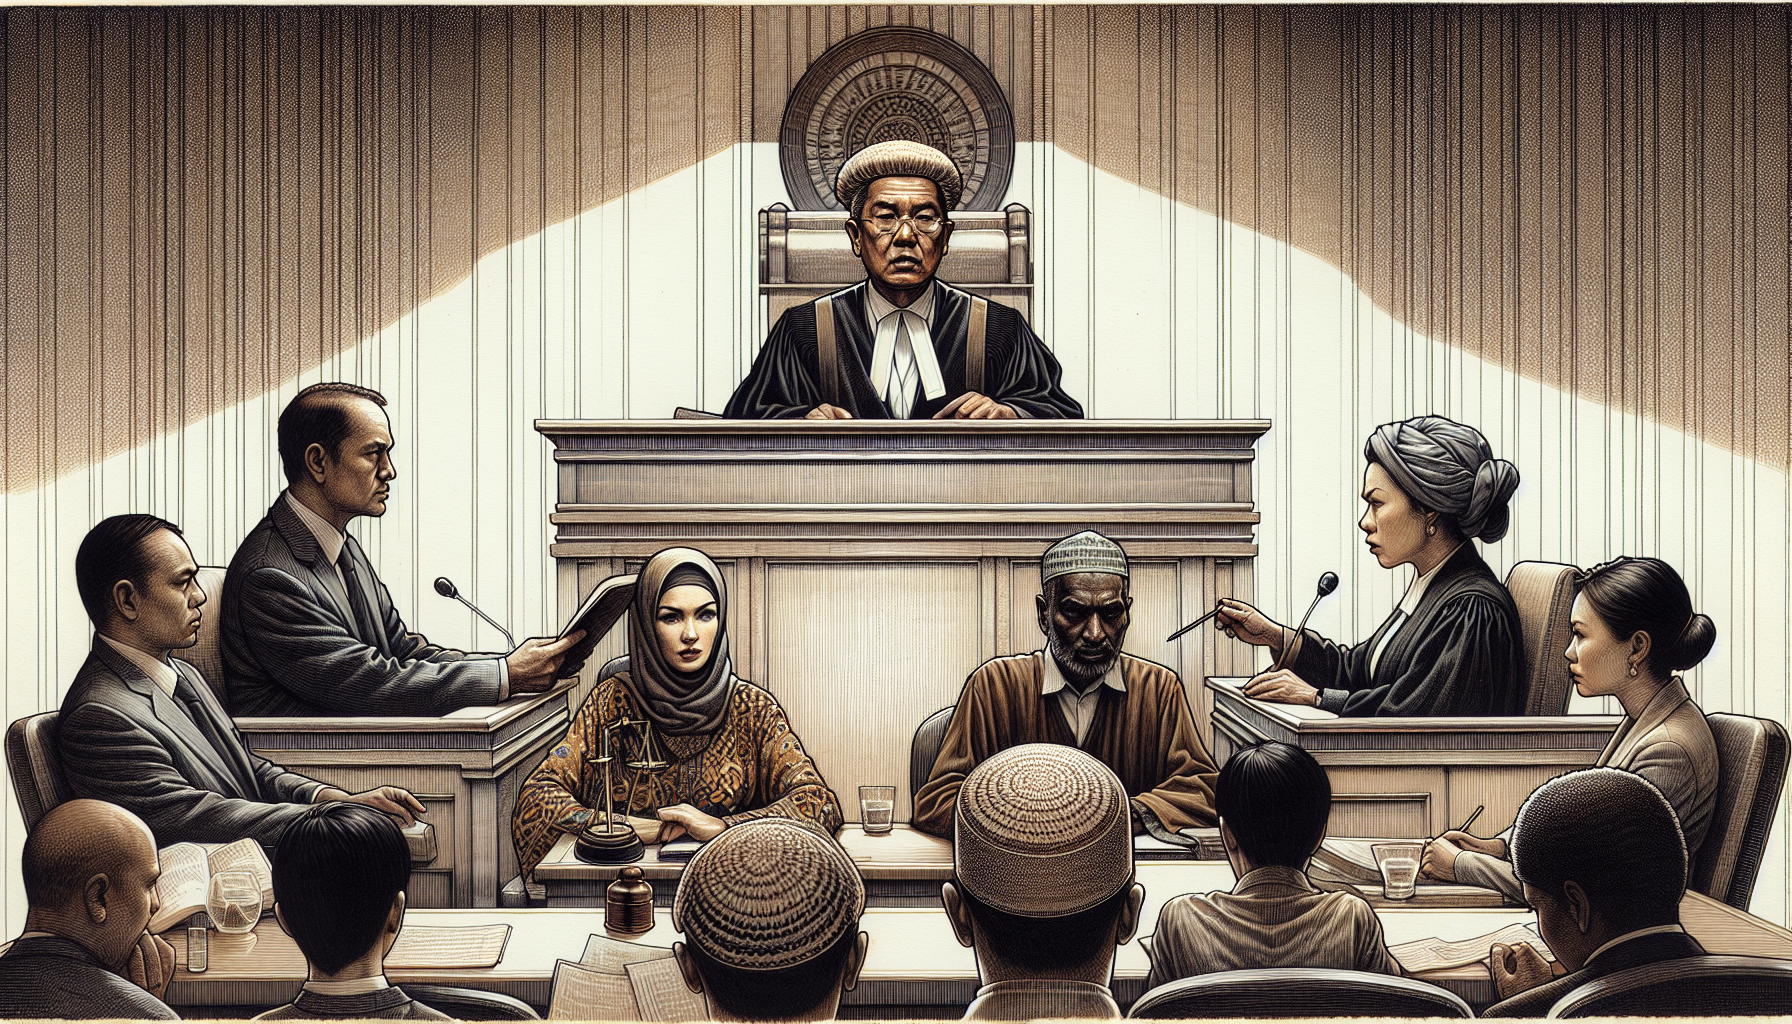 Illustration of a courtroom with judge and lawyers